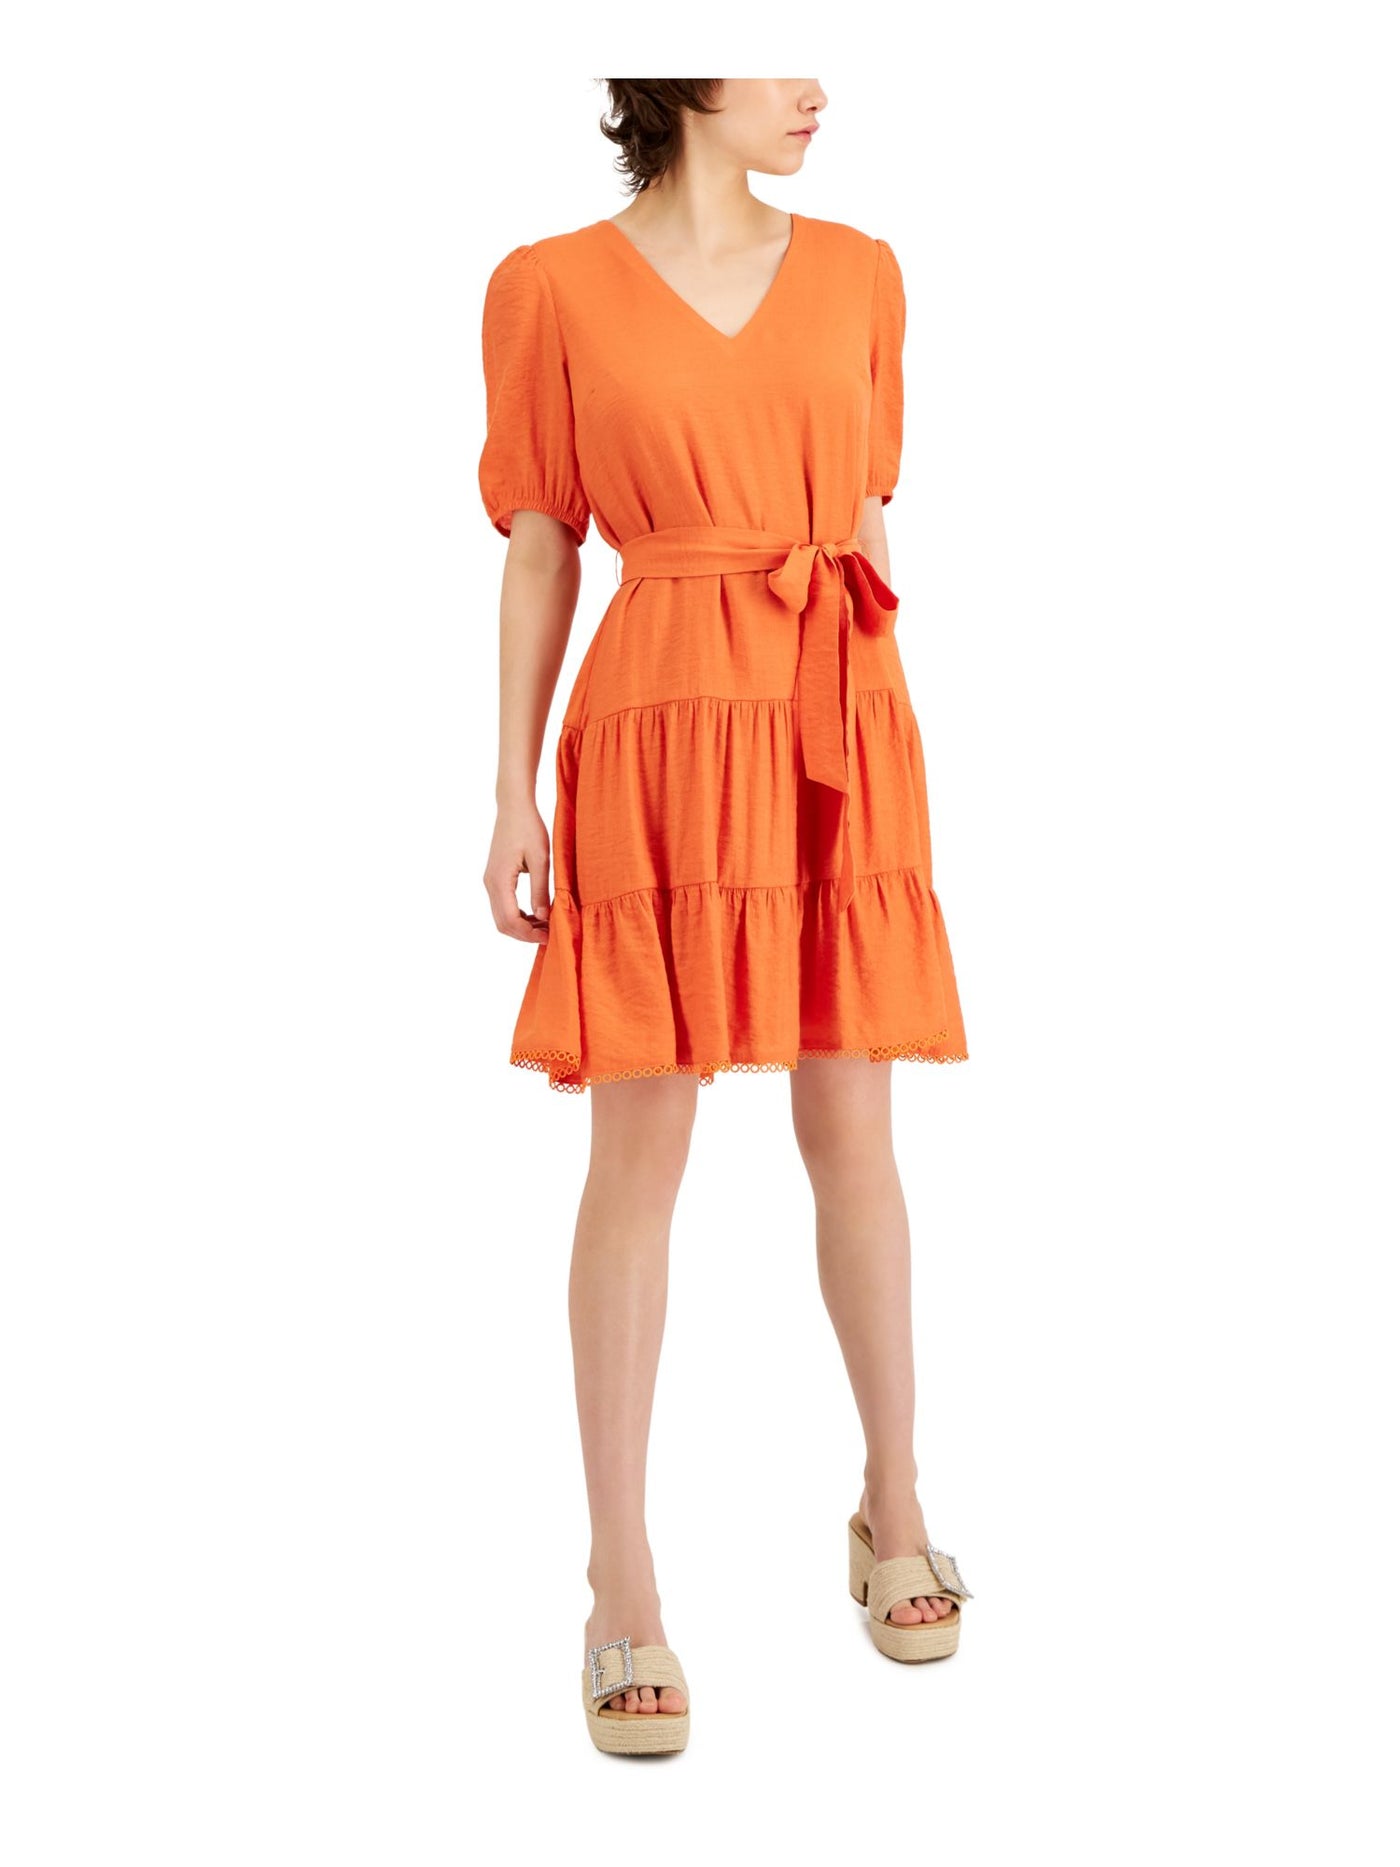 INC DRESSES Womens Orange Zippered Embellished Tiered Tie Back And Waist Elbow Sleeve V Neck Above The Knee A-Line Dress M